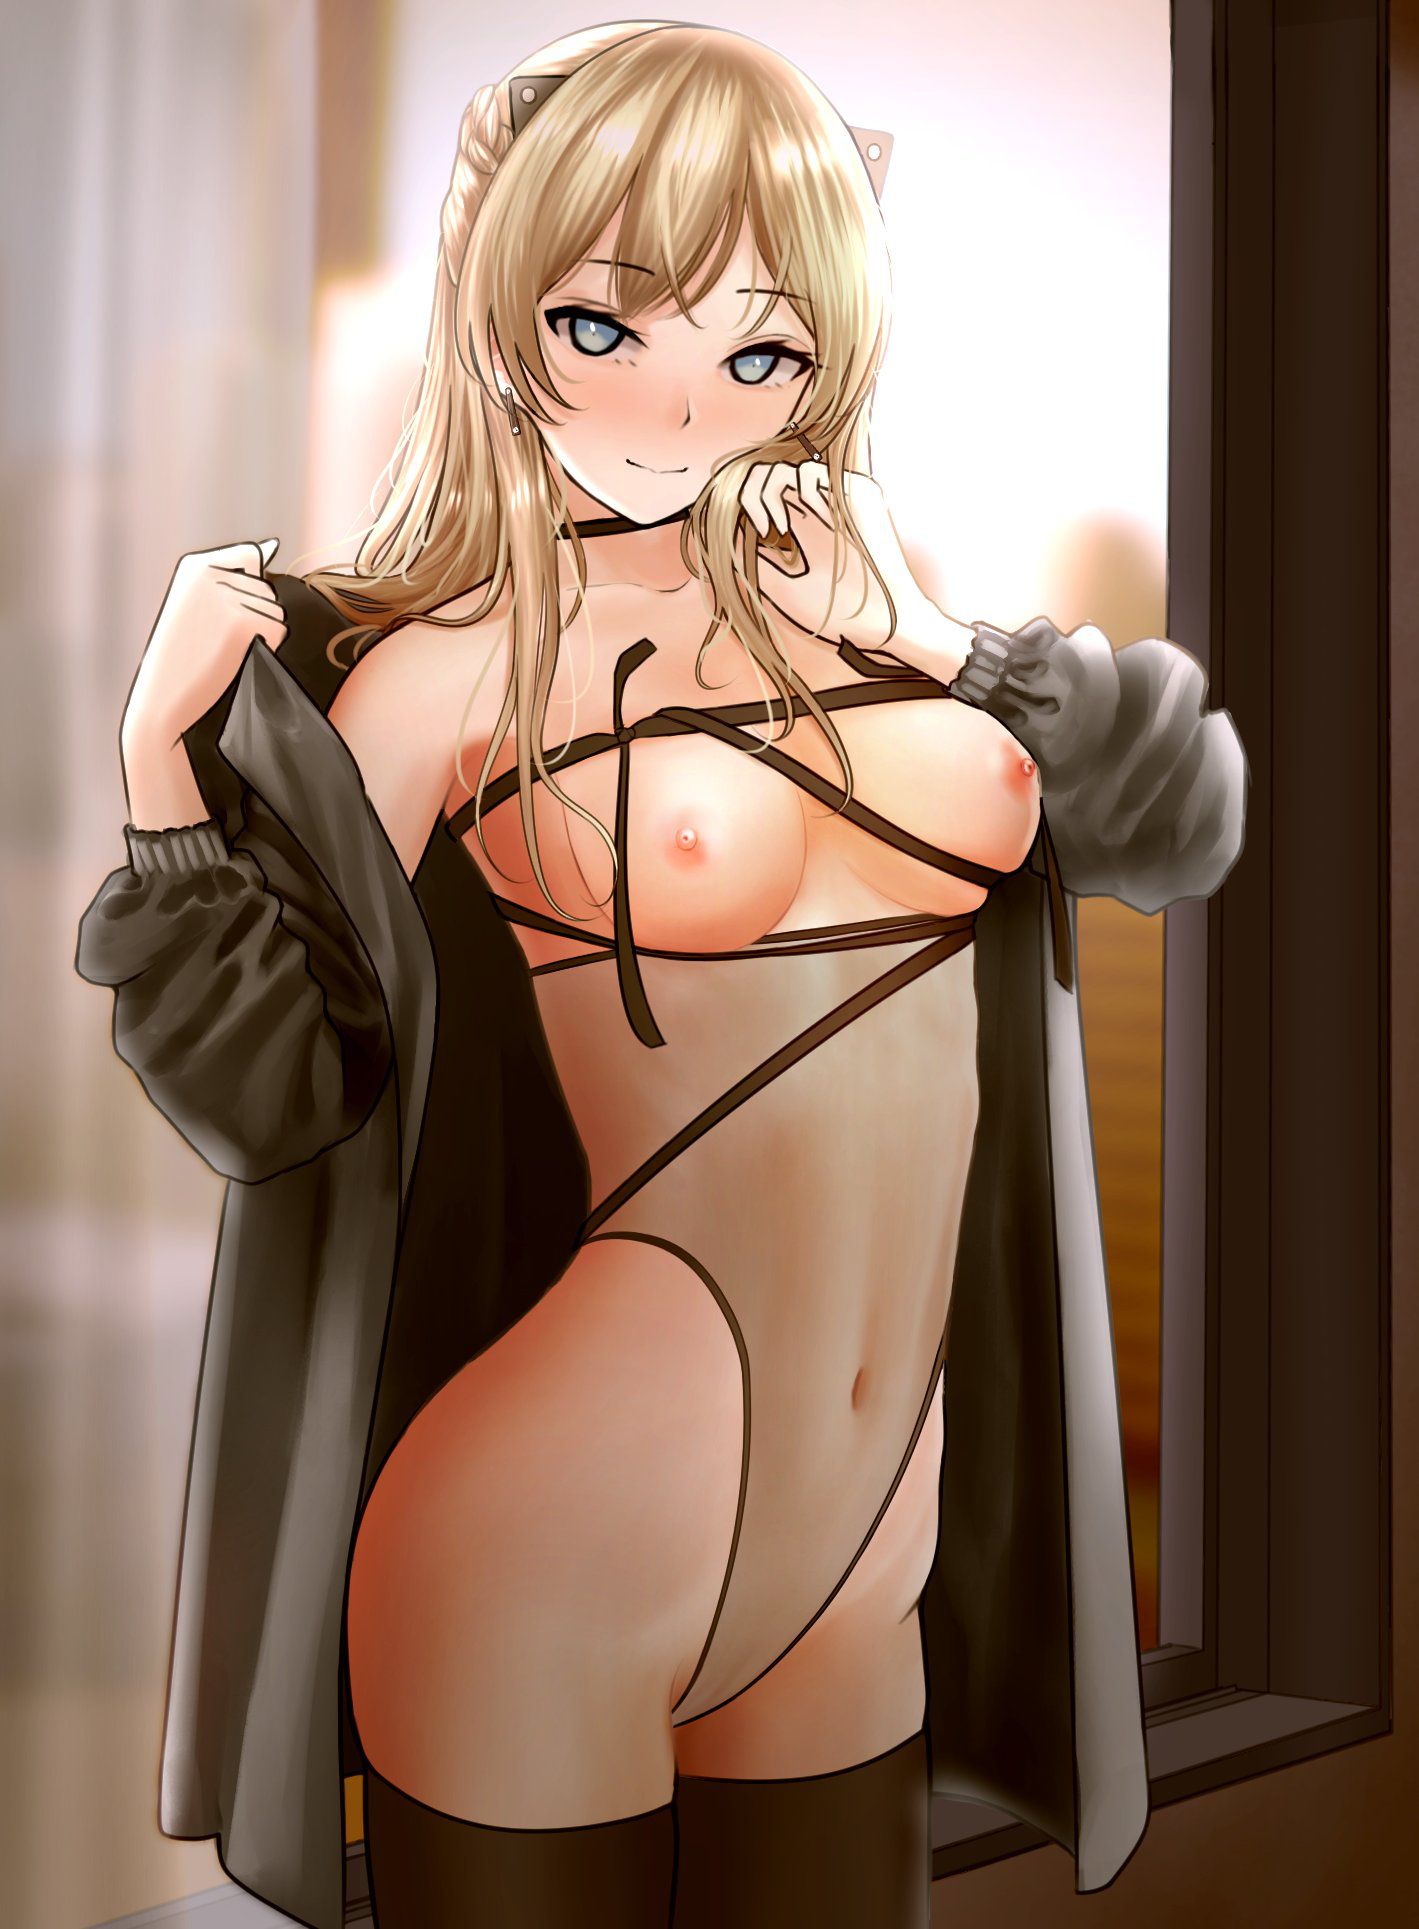 【Erotic Anime Summary】 Erotic images of beautiful girls with beautiful breasts 【50 photos】 38